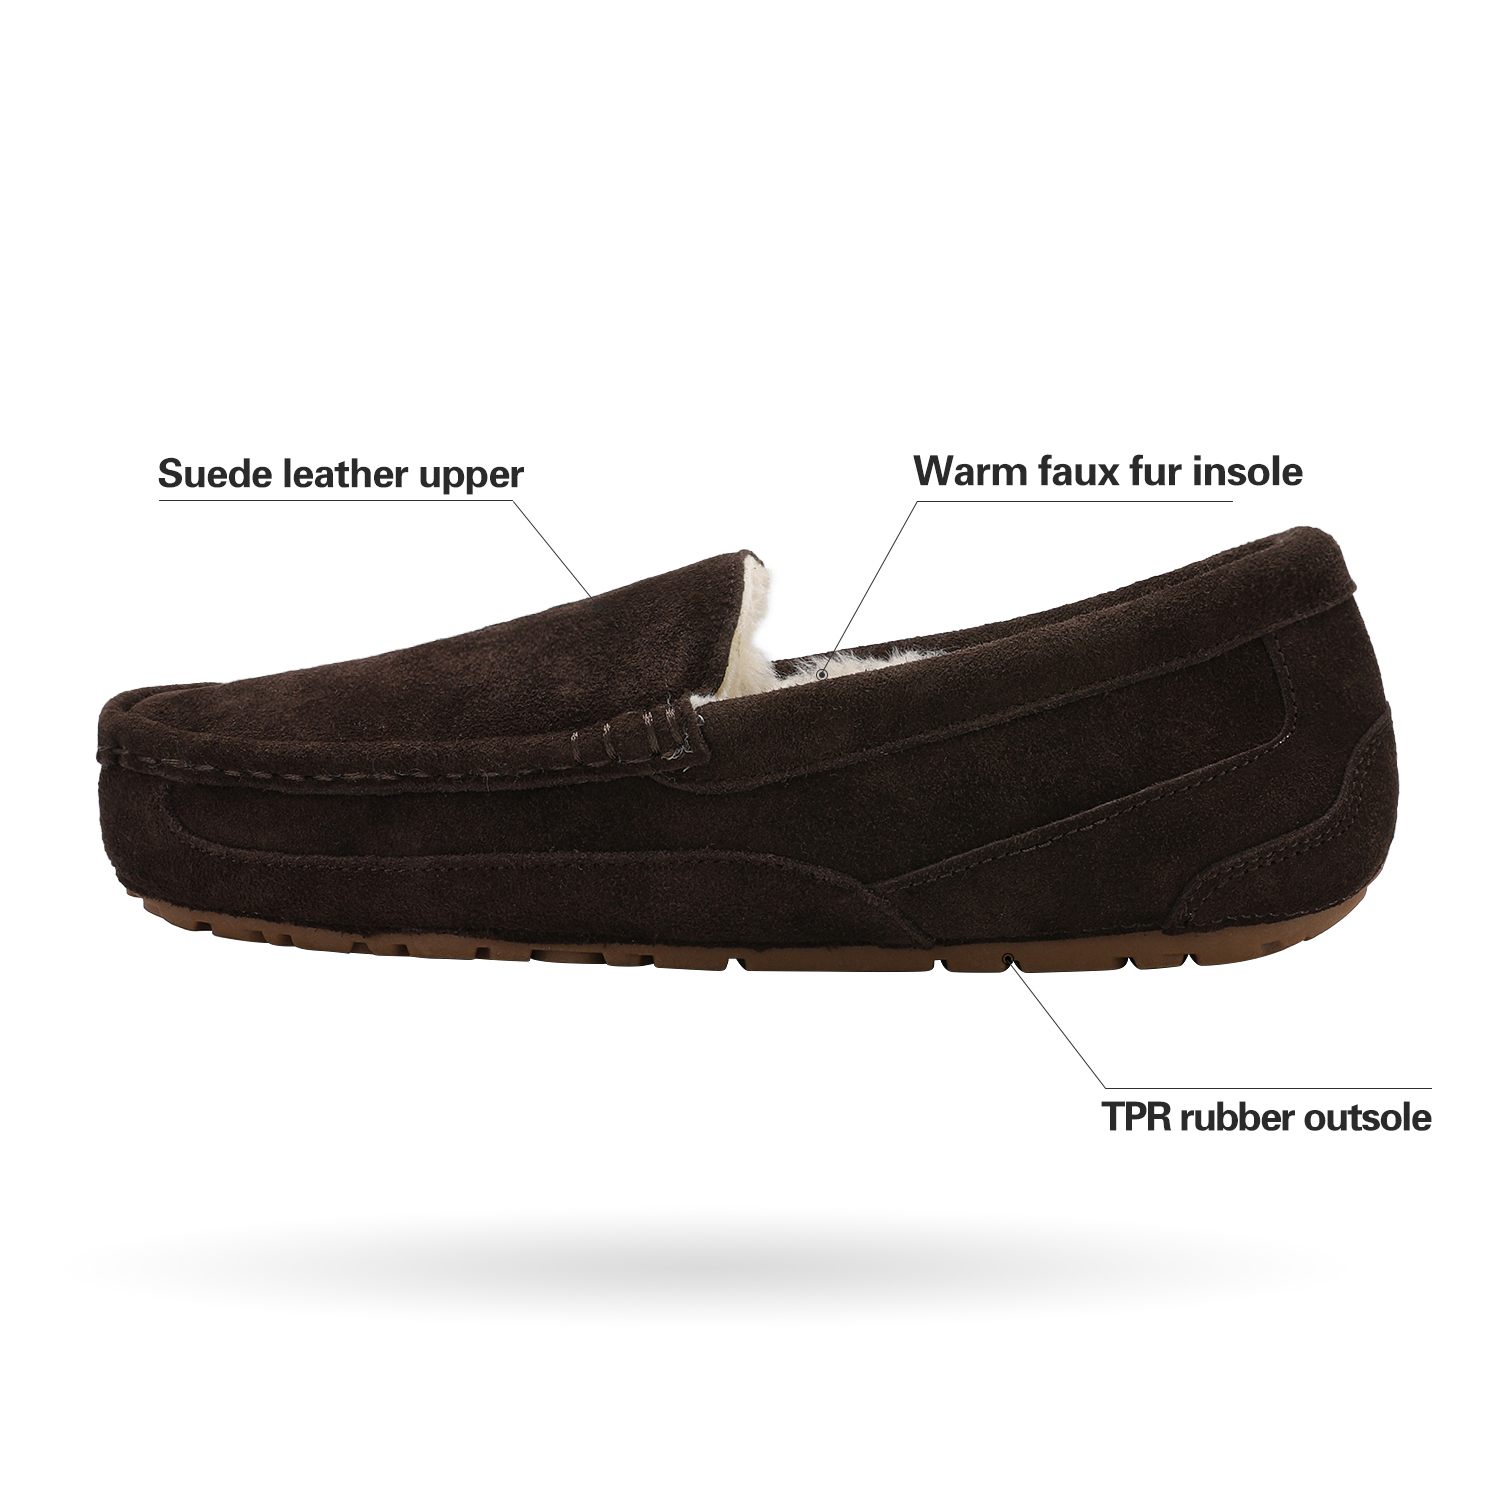 Dream Pairs New Soft Mens Au-Loafer Indoor Warm Moccasins Slippers Flats Shoes Au-Loafer-01 Brown Size 7 - image 2 of 4